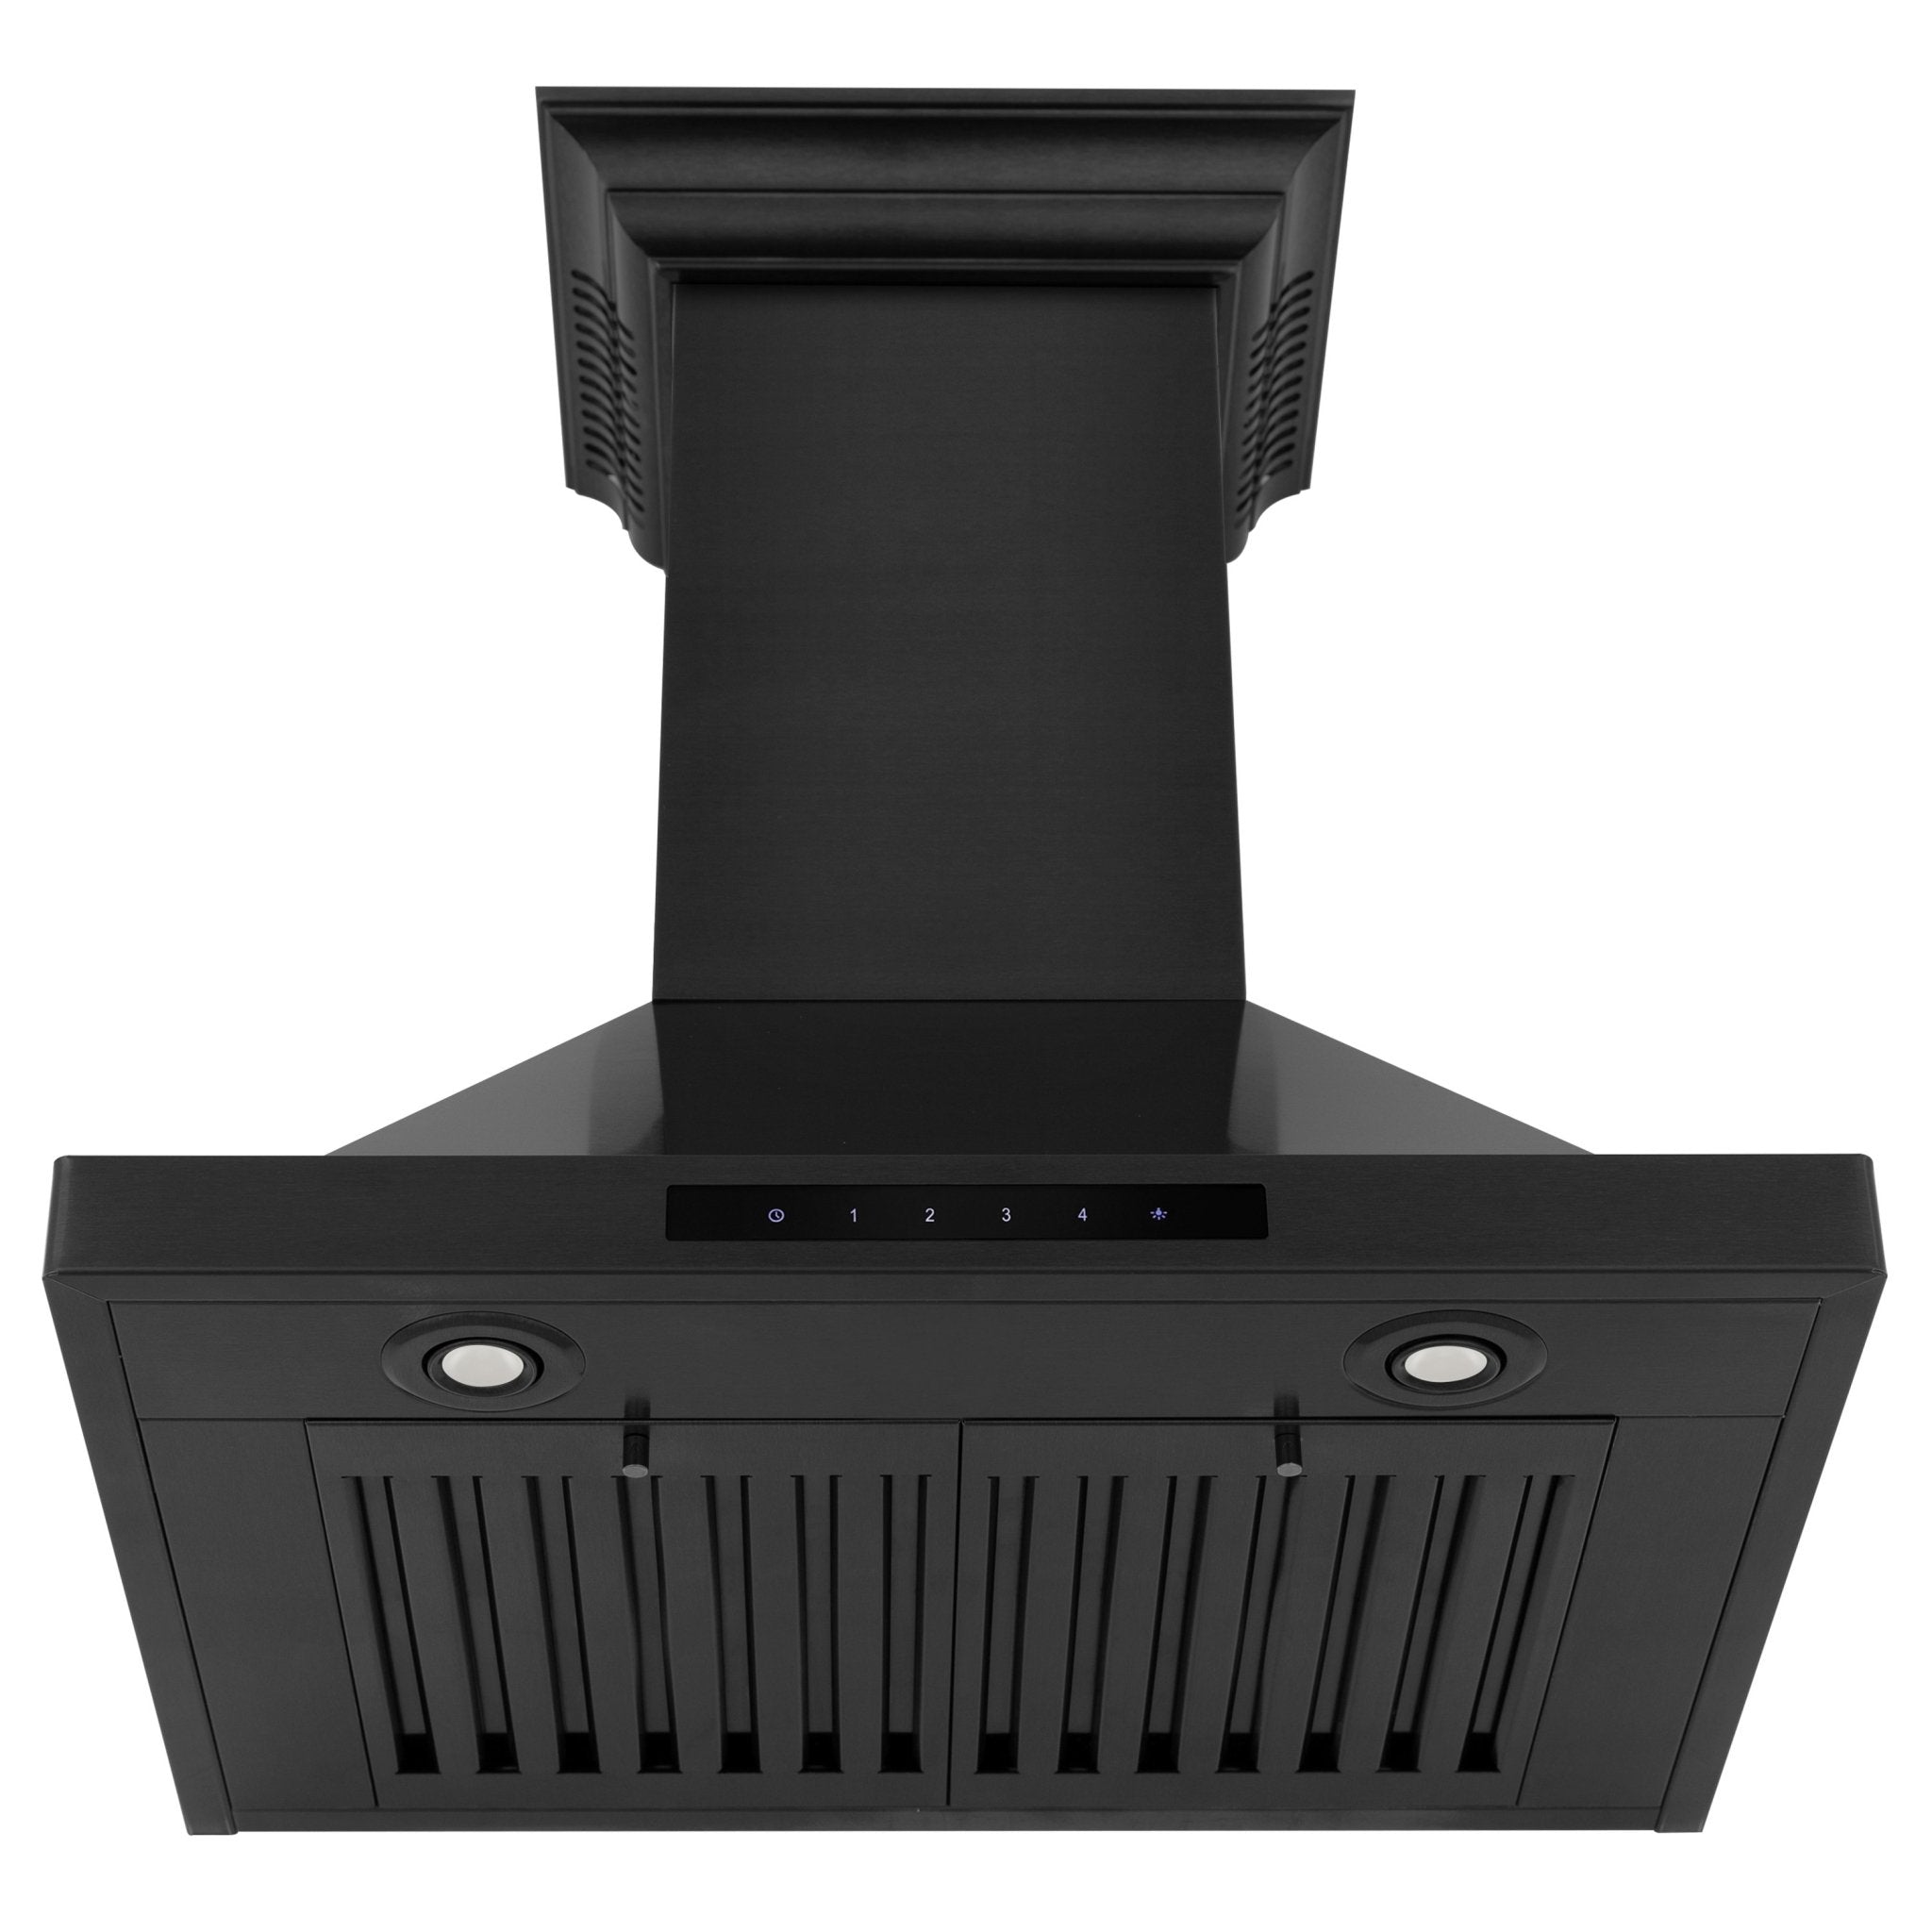 24" ZLINE CrownSound, Ducted Vent Wall Mount Range Hood in Black Stainless Steel with Built-in Bluetooth Speakers (BSKBNCRN-BT-24)